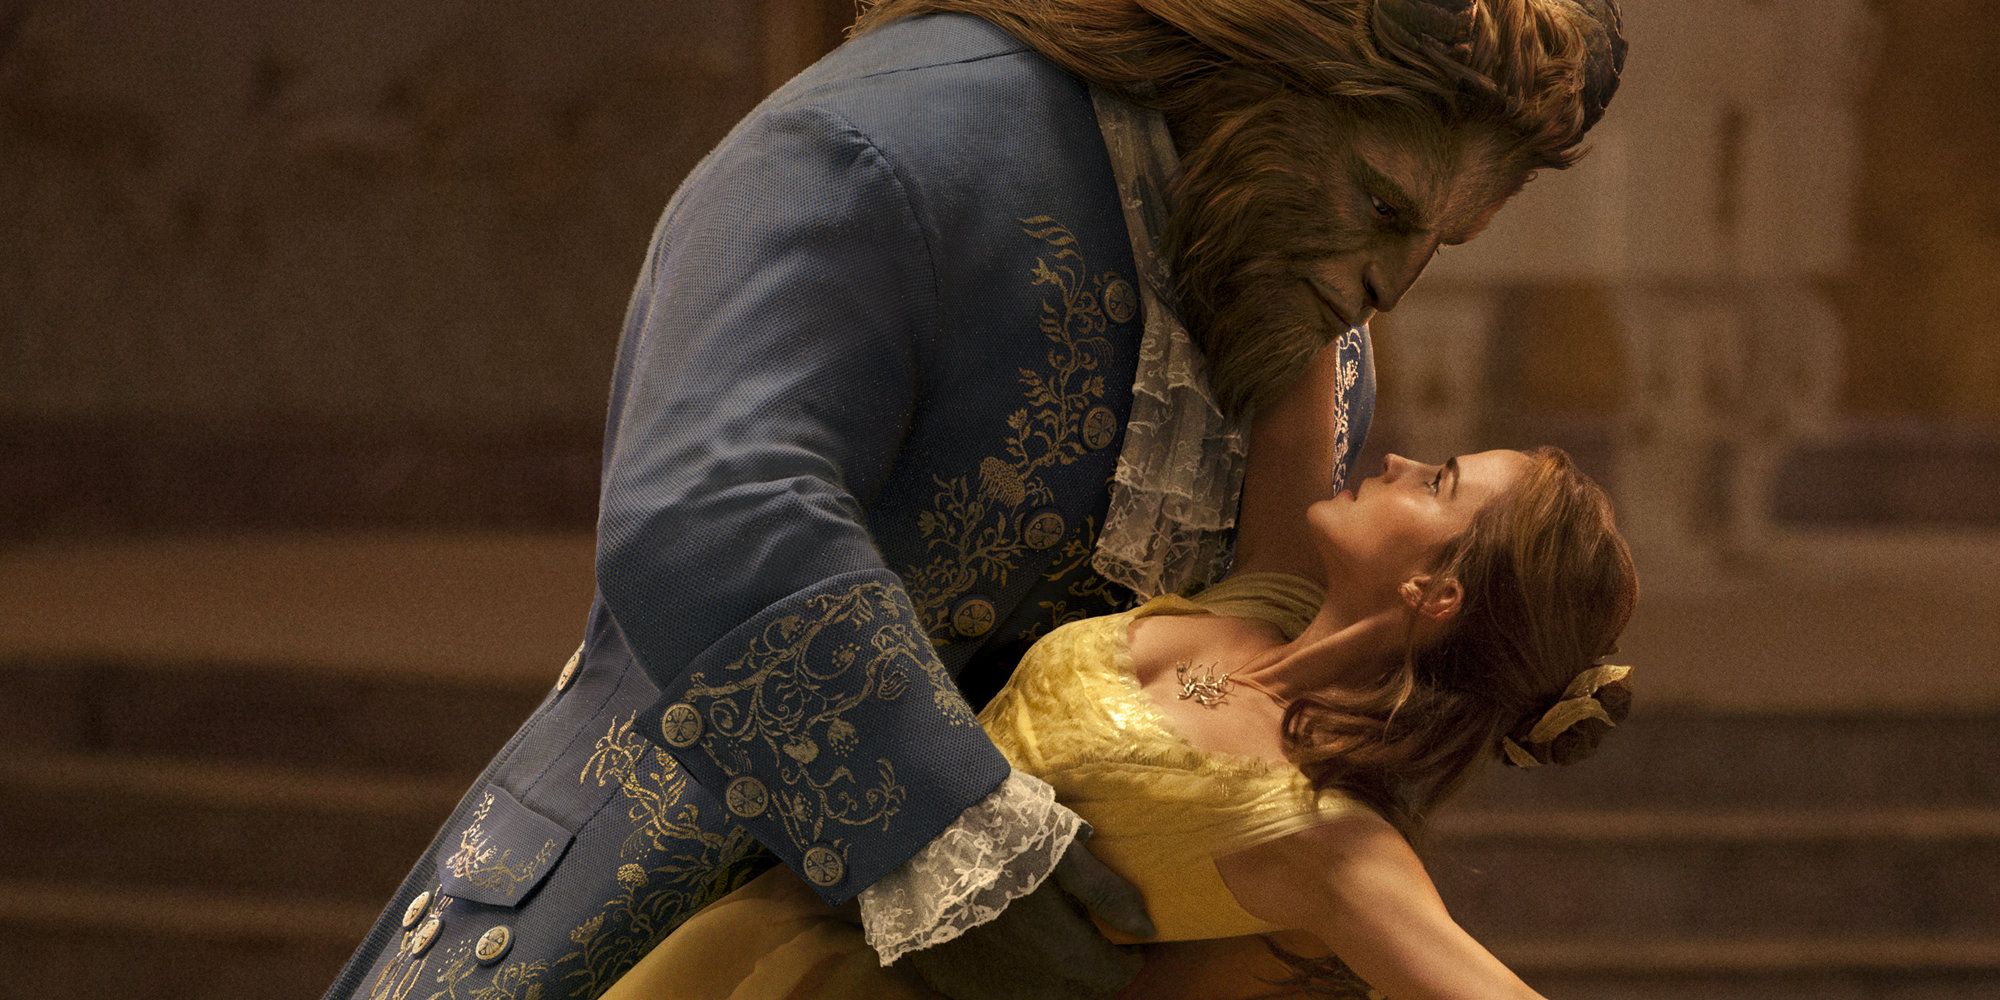 Beast and Belle dance in Beauty and the Beast